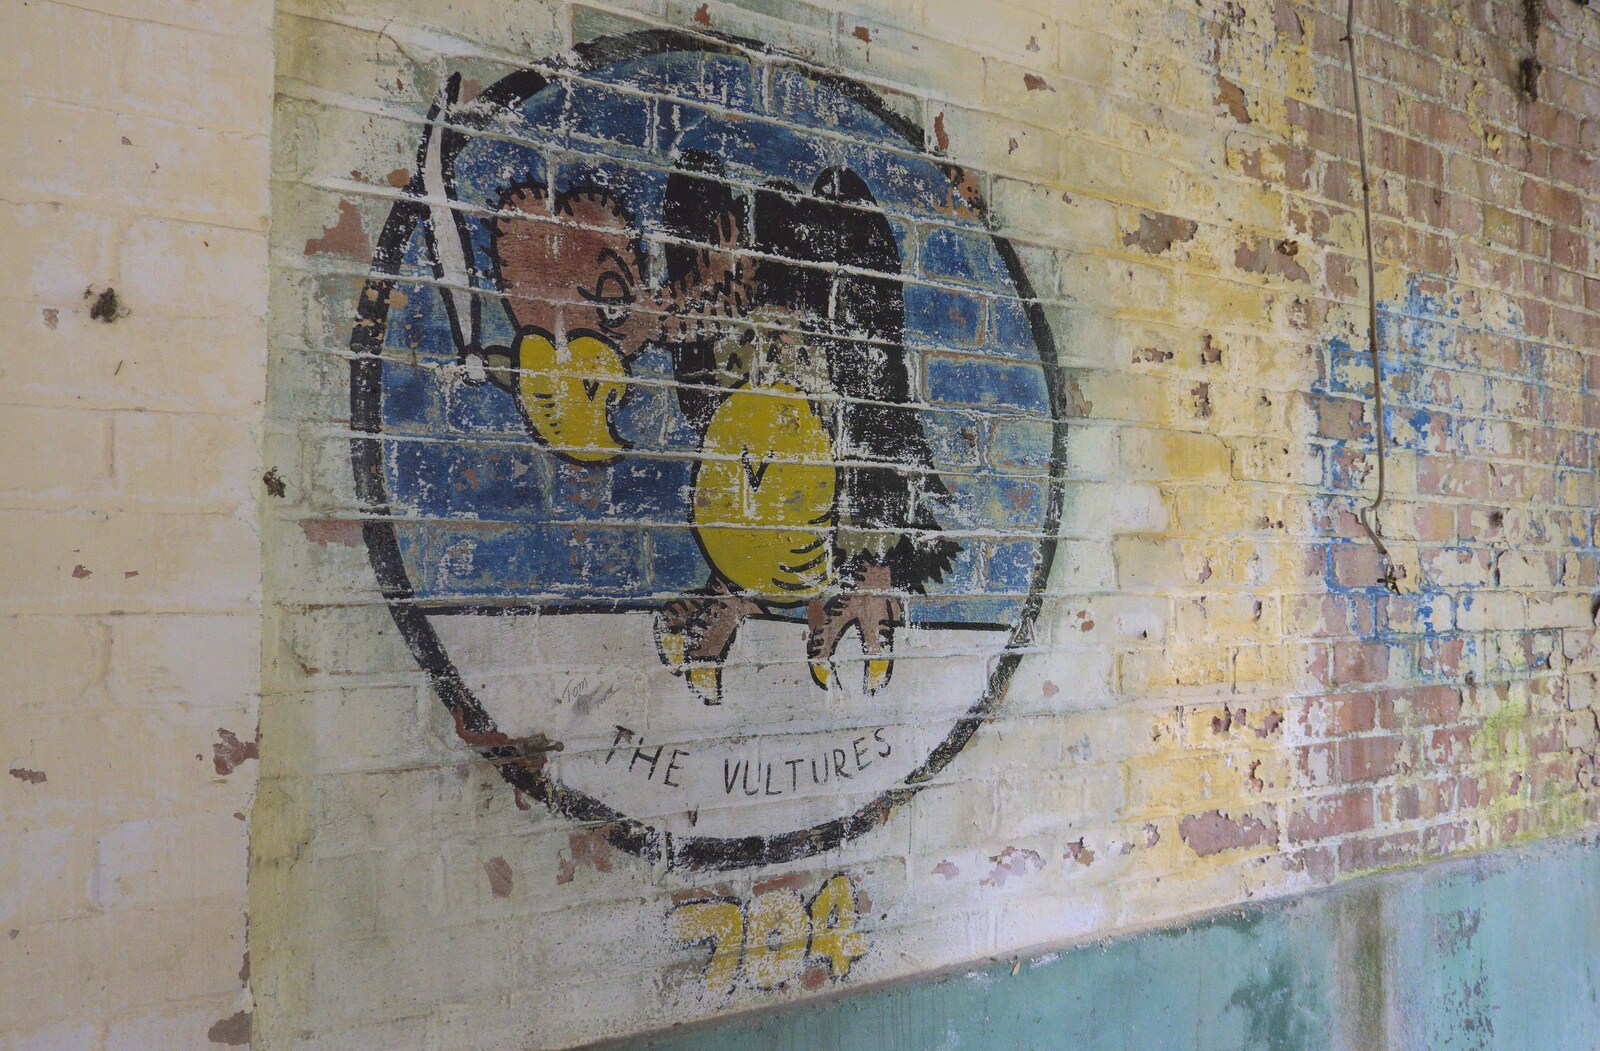 Artwork of the 704th Bomb Squadron - The Vultures from A 1940s Timewarp, Site 4, Bungay Airfield, Flixton, Suffolk - 9th June 2022